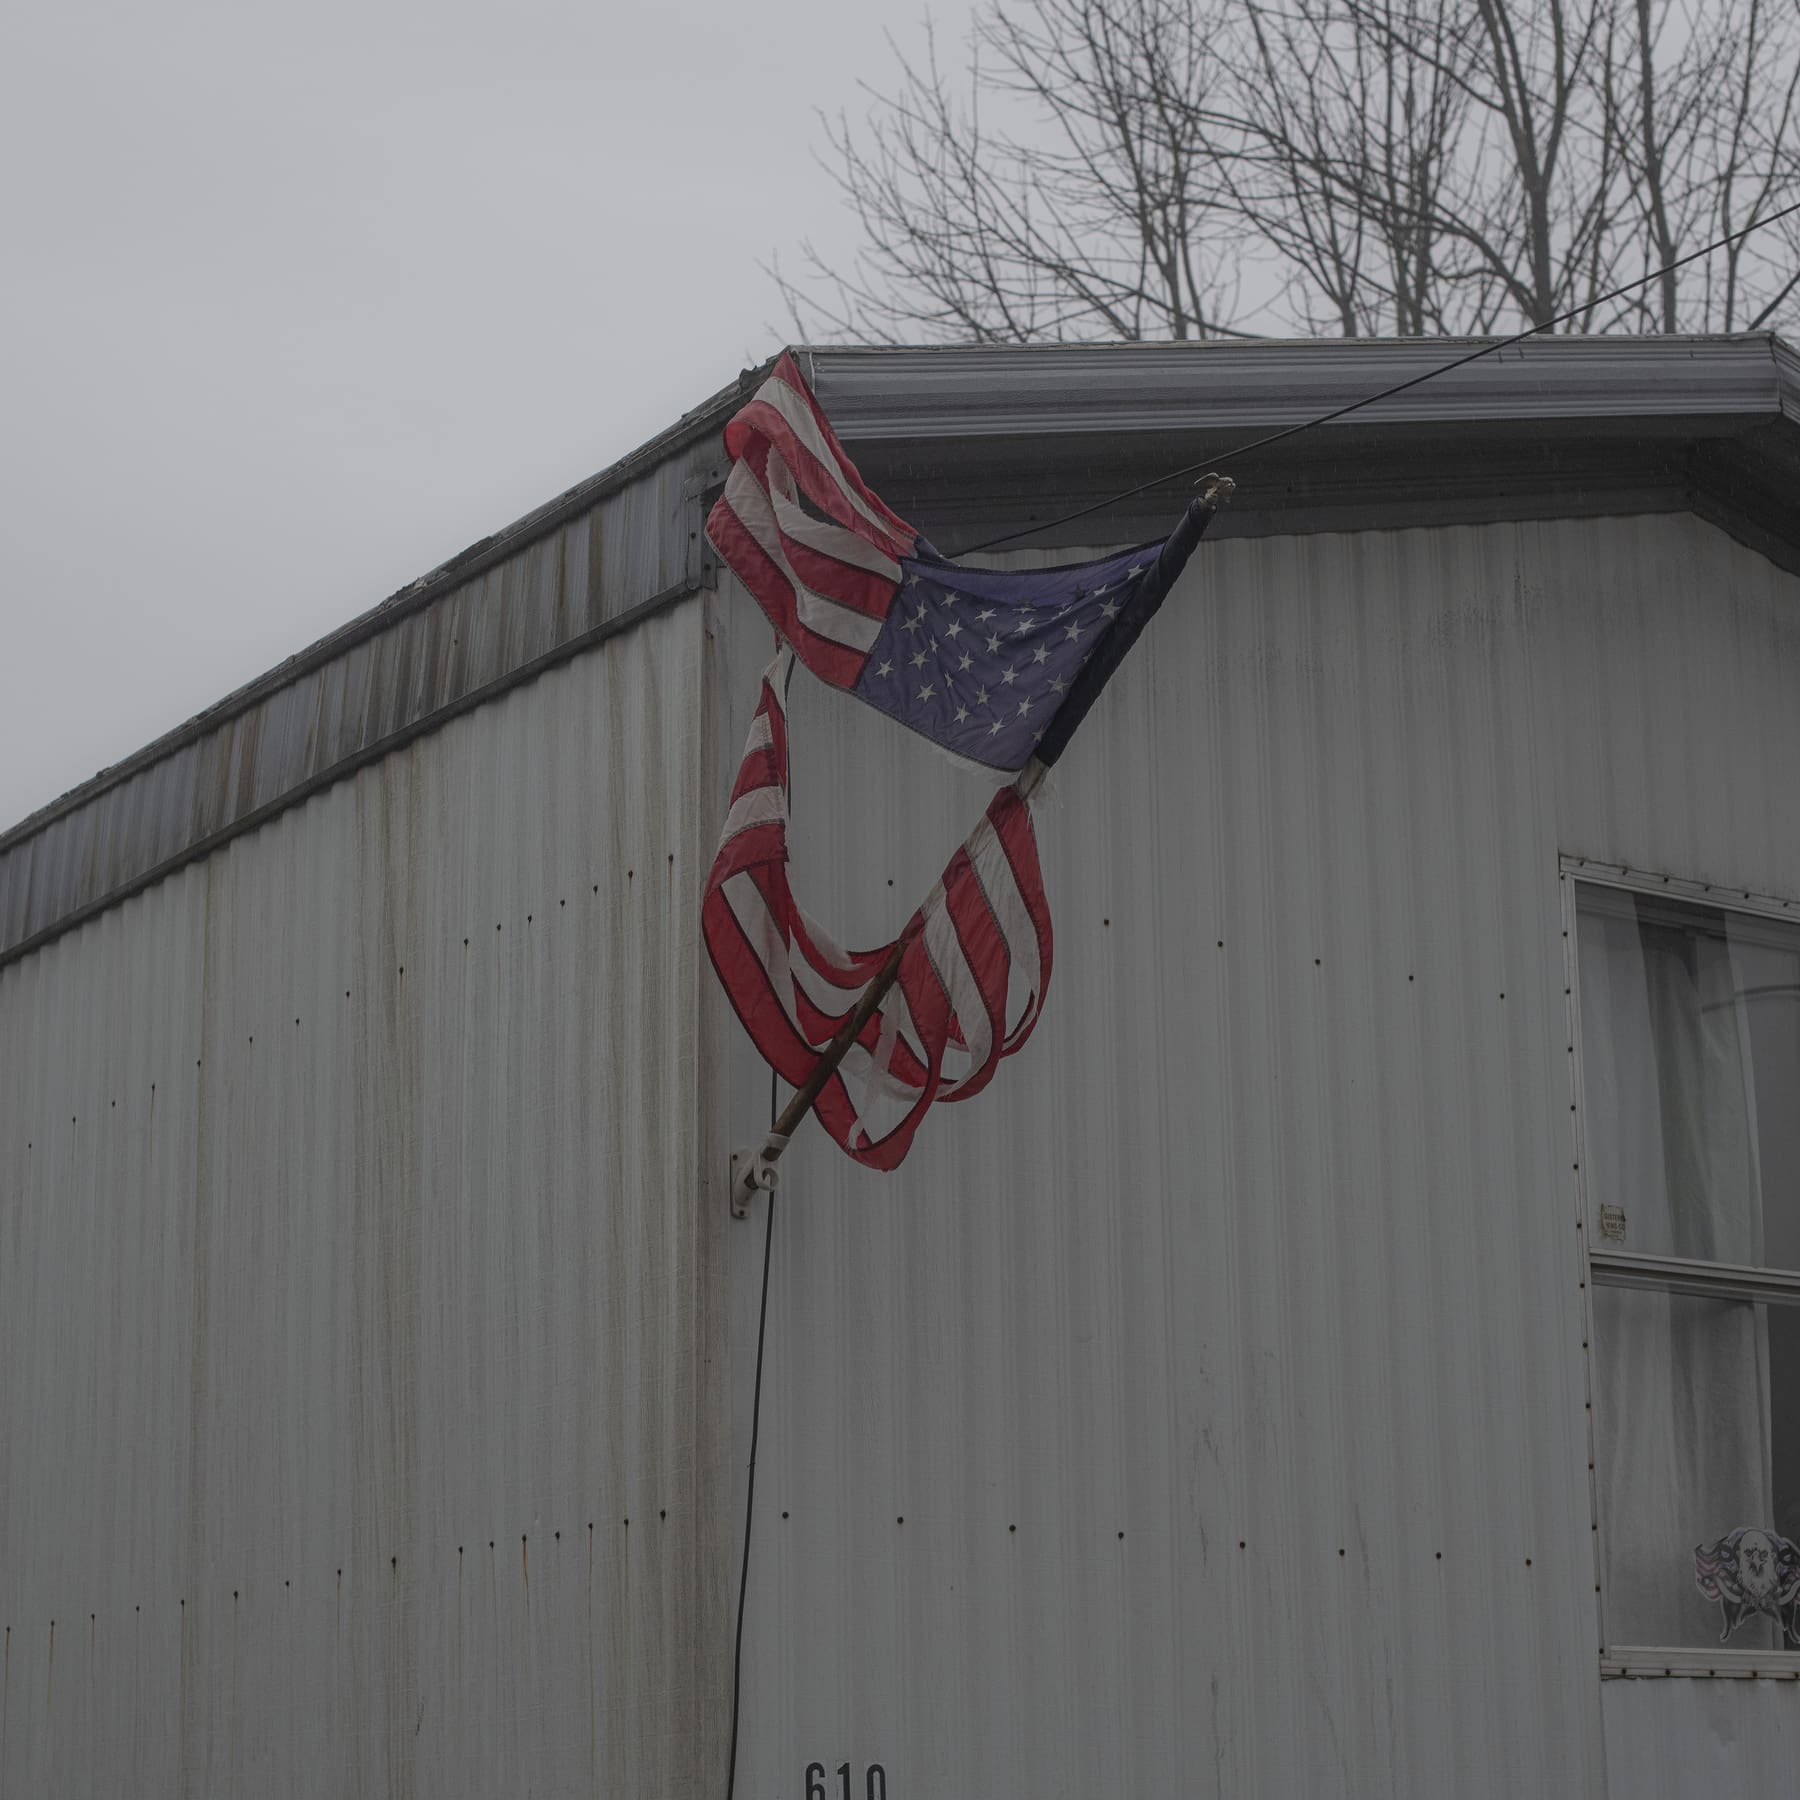 Photographer Rich-Joseph Facun | A battered American flag blows against a white-board building, against a pale-grey sky